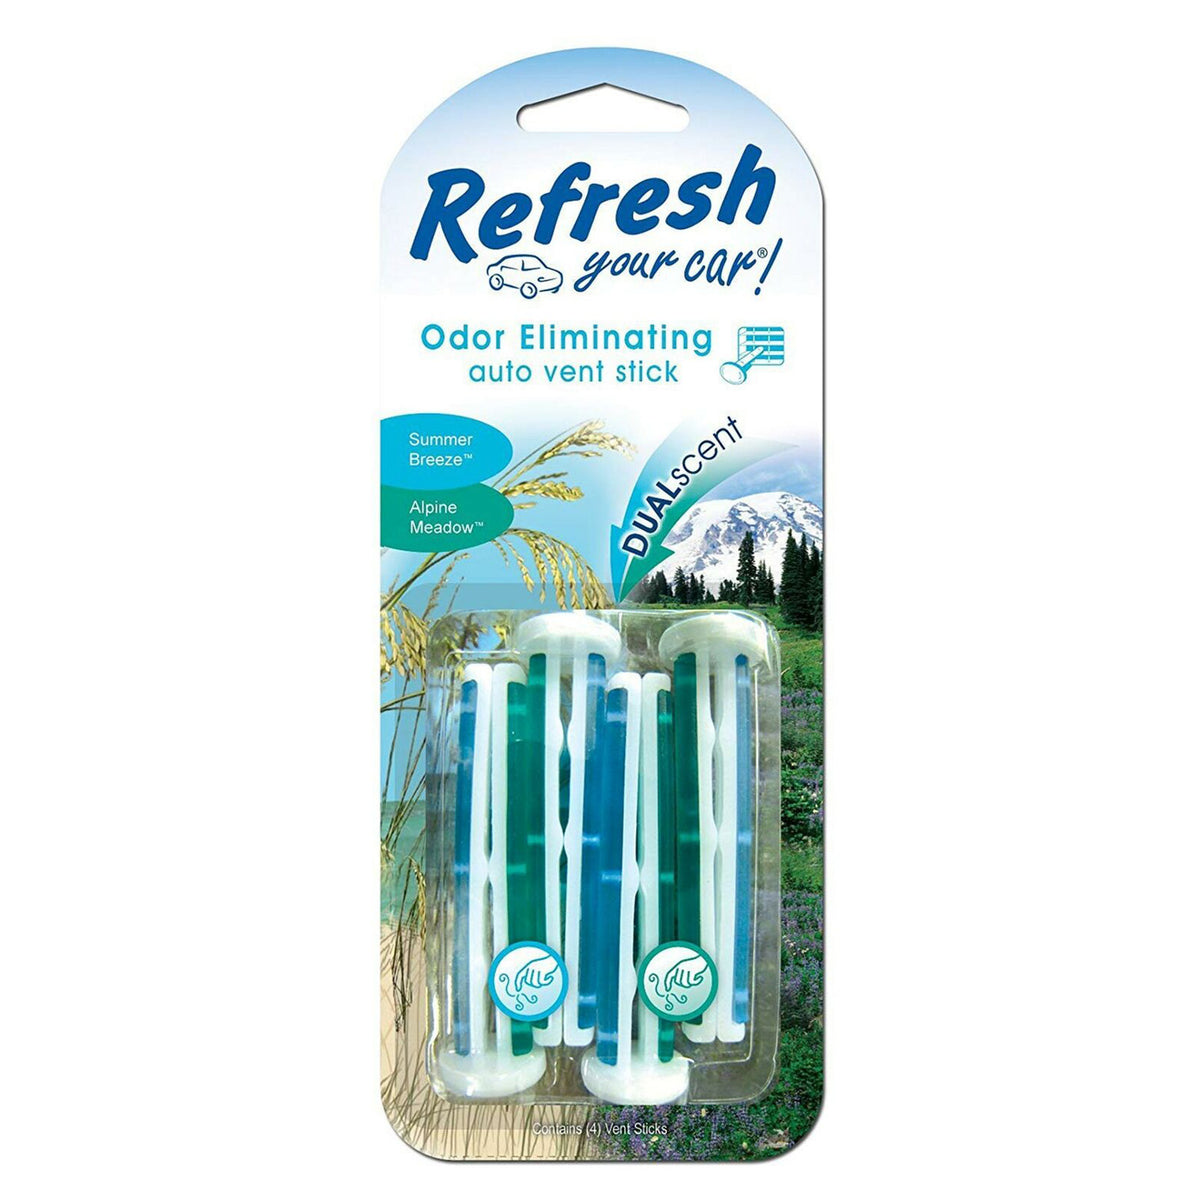 Dual Scent Alpine Meadow & Summer Breeze scent Contains: 4 pieces